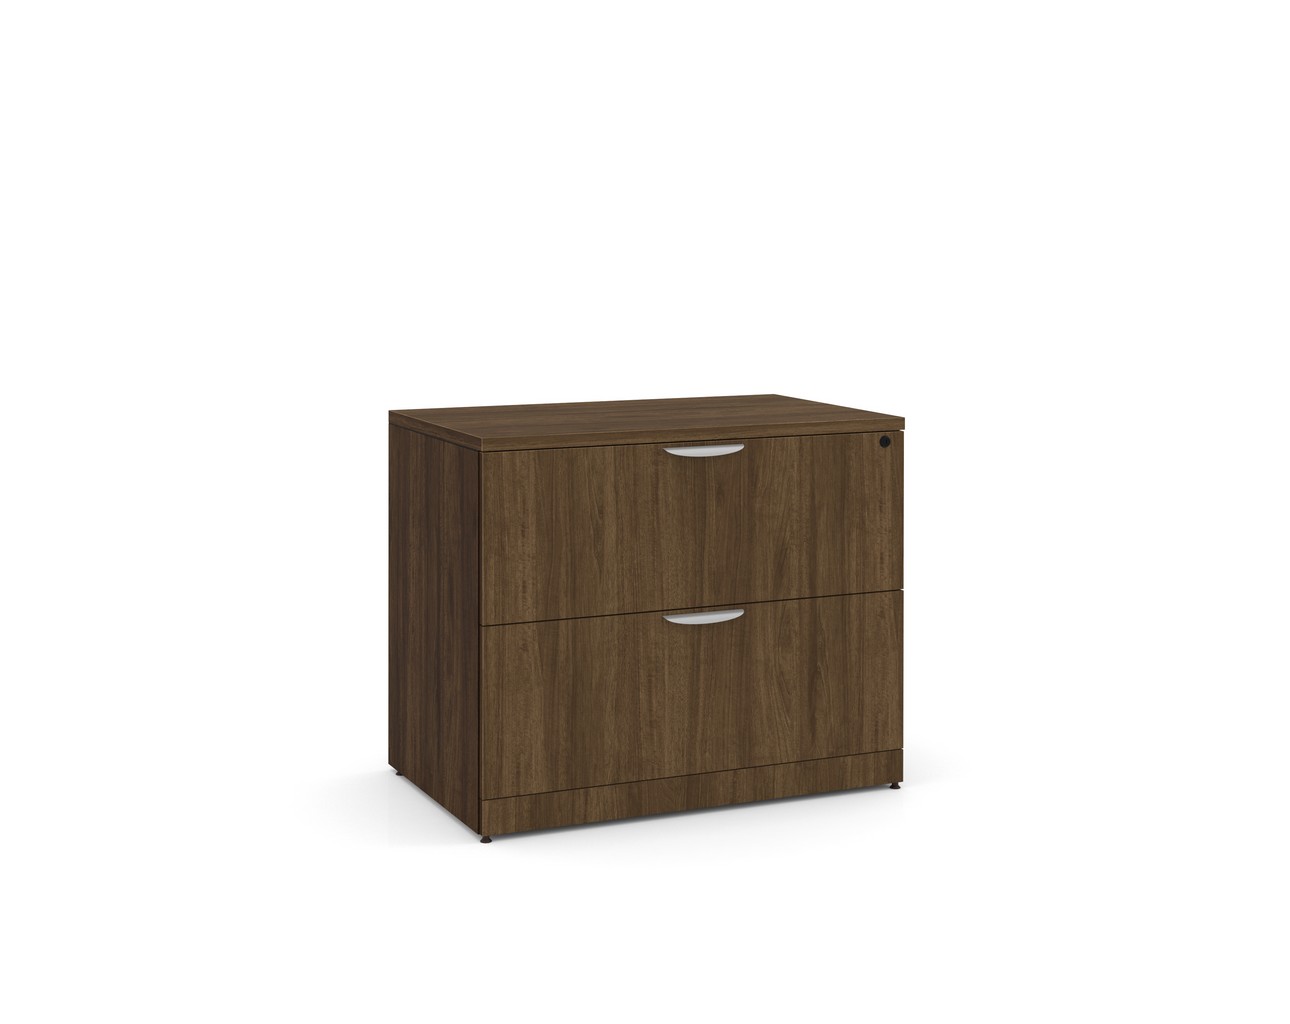 2 Drawer Lateral Filing Cabinet with Modern Walnut Finish